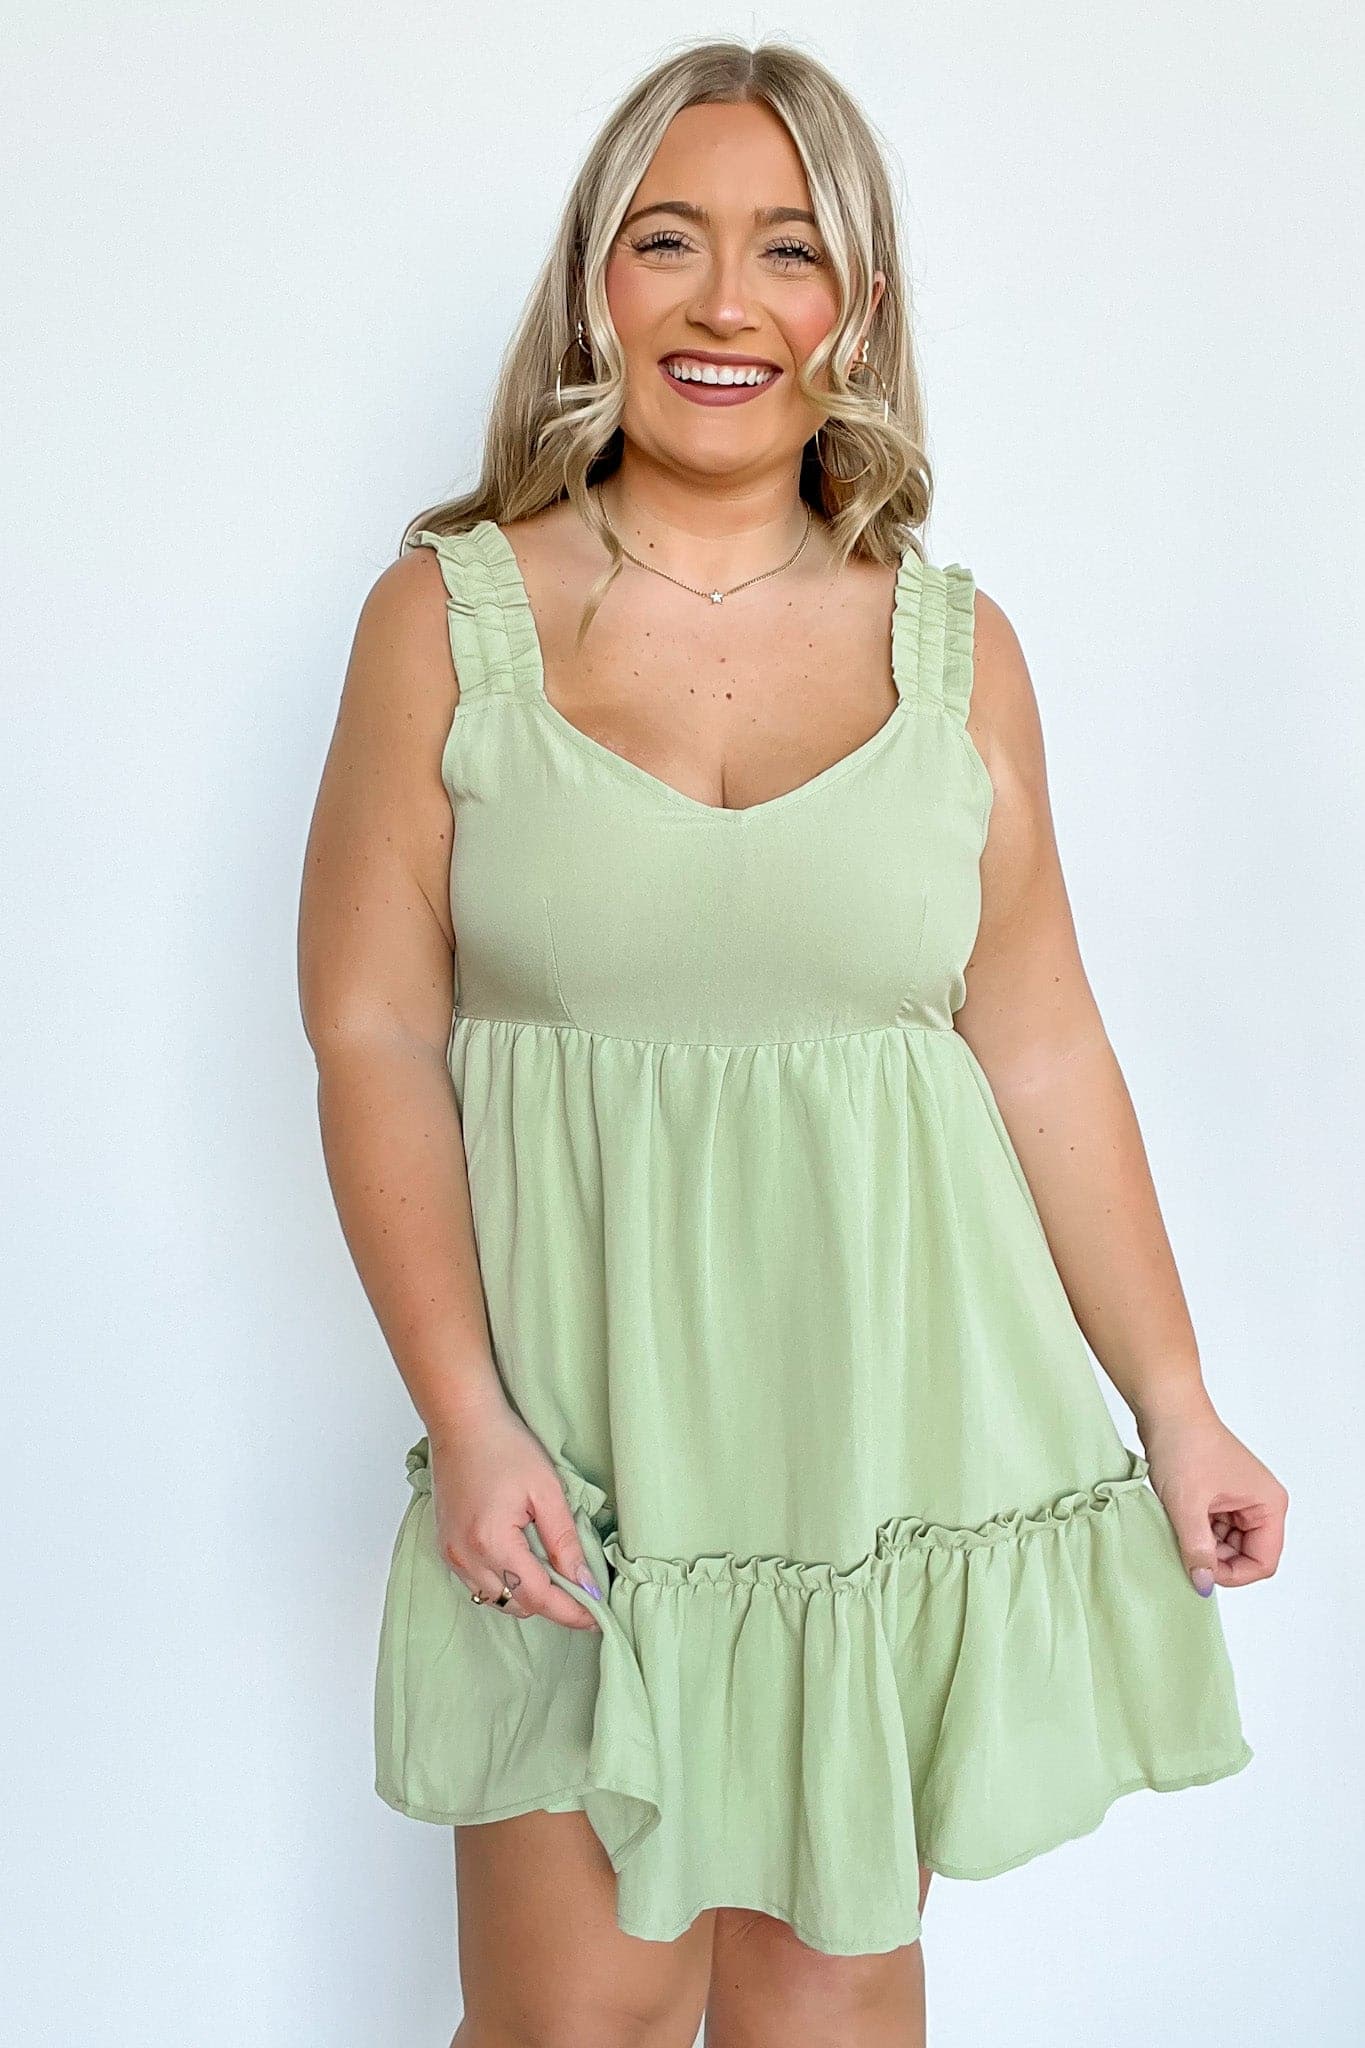  Perfectly Pleased Tiered Ruched Strap Dress - FINAL SALE - Madison and Mallory